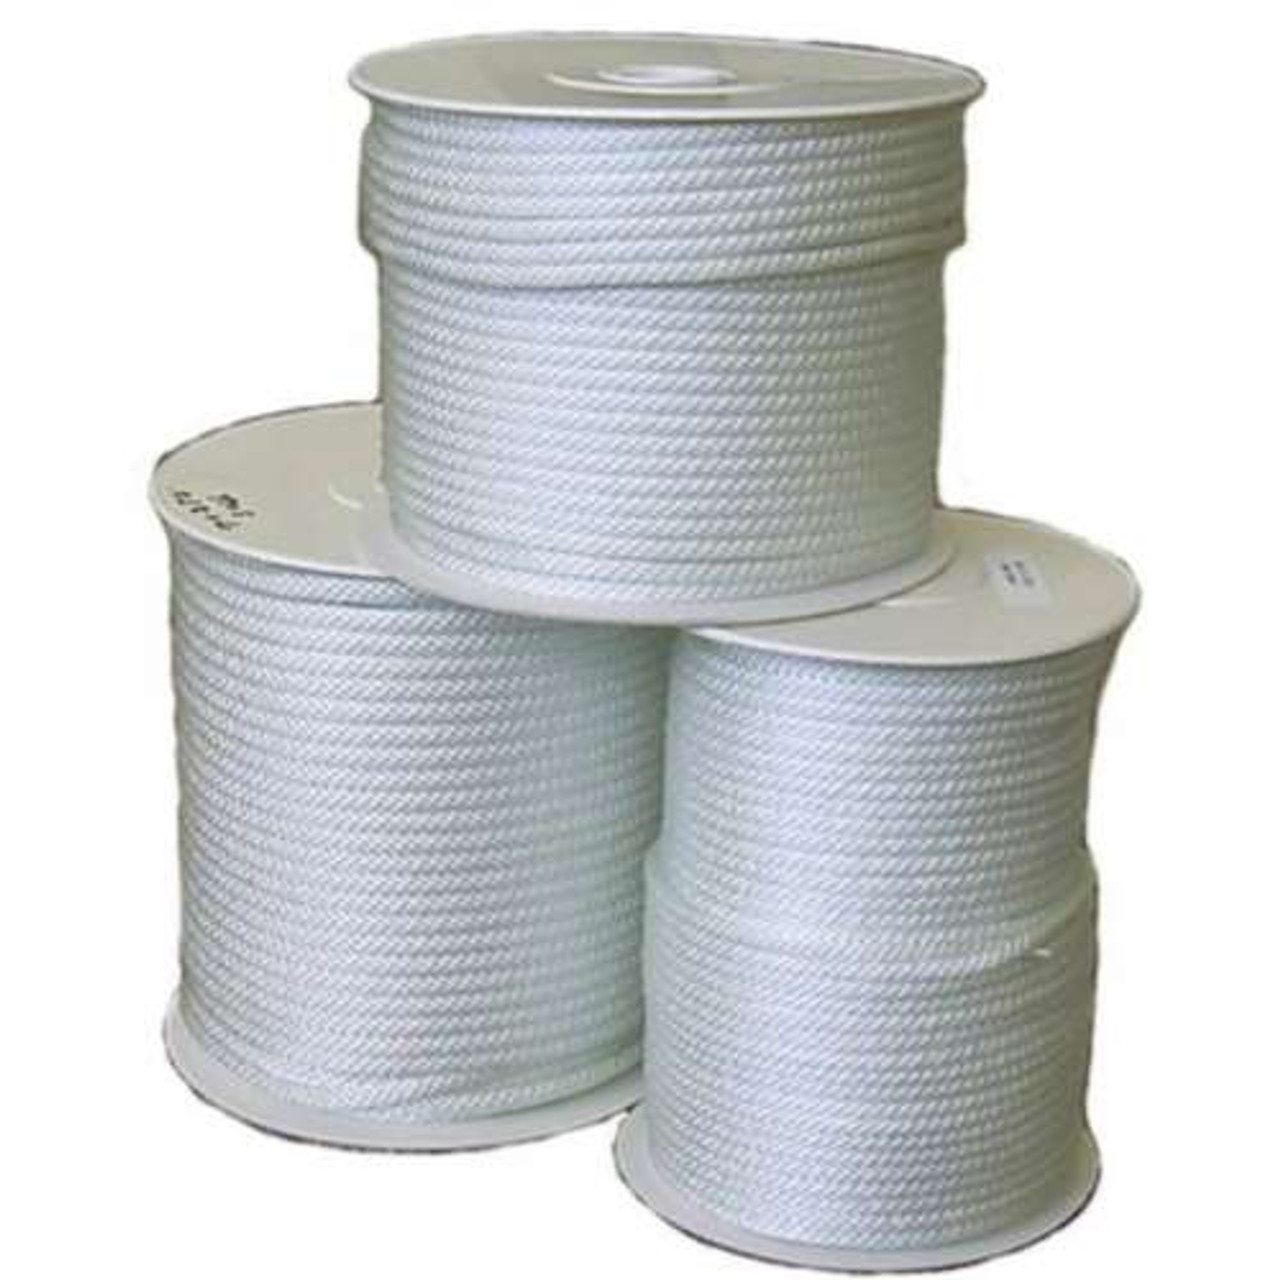 1/8 X 1000' WHITE SOLID BRAID NYLON ROPE - 575 LBS BREAK #4 - Bairstow  Lifting Products